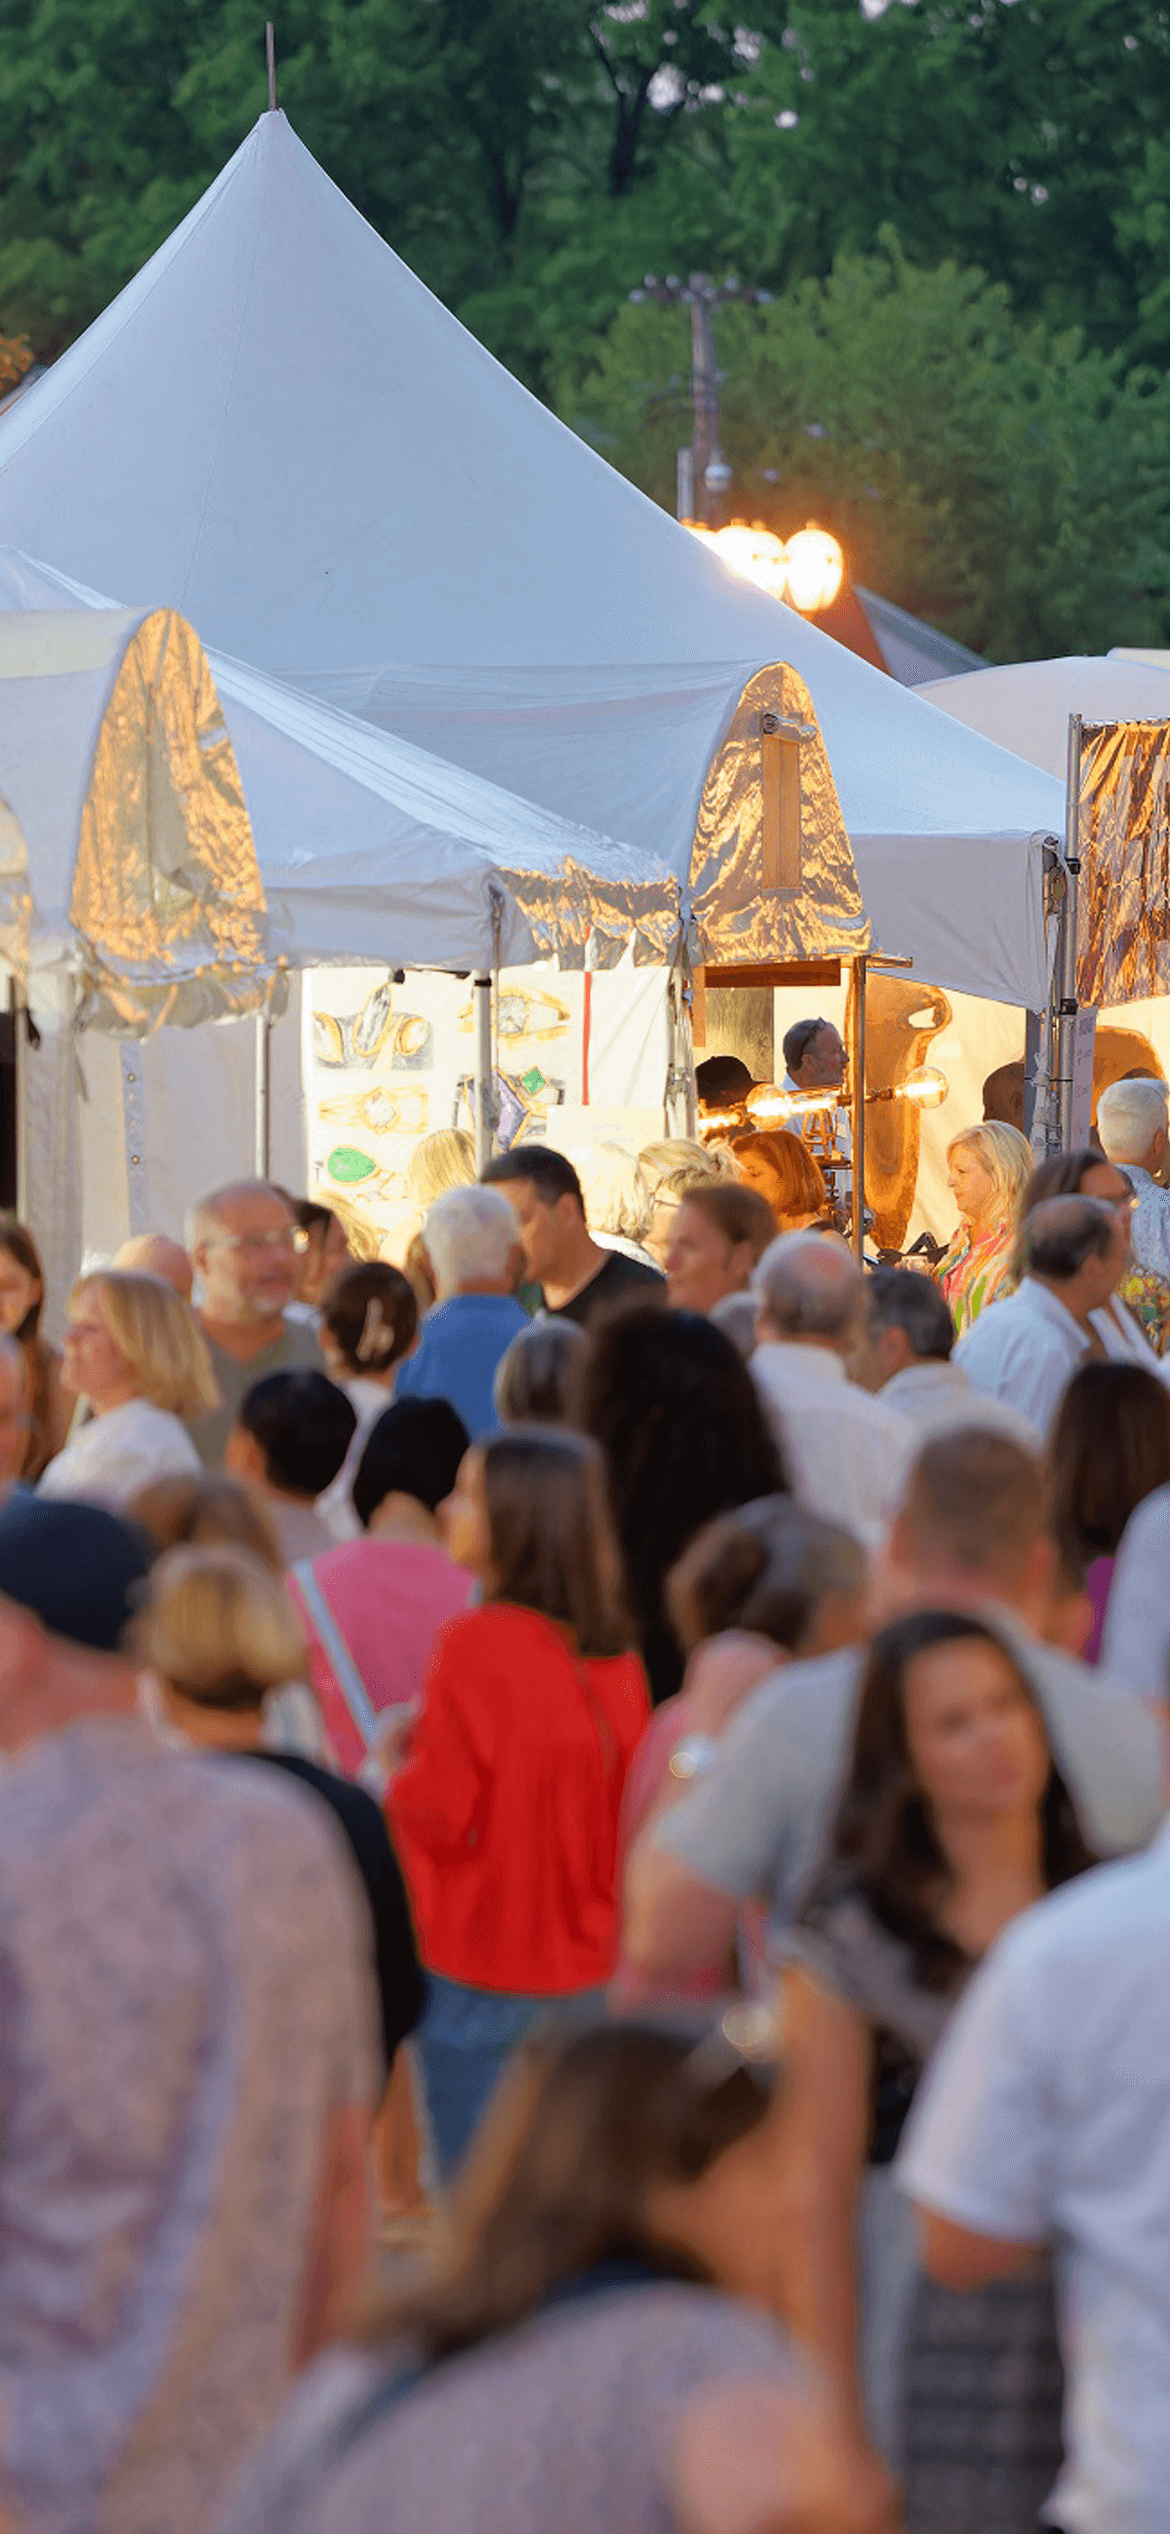  See you in 2024 for the 31st Saint Louis Art Fair!  